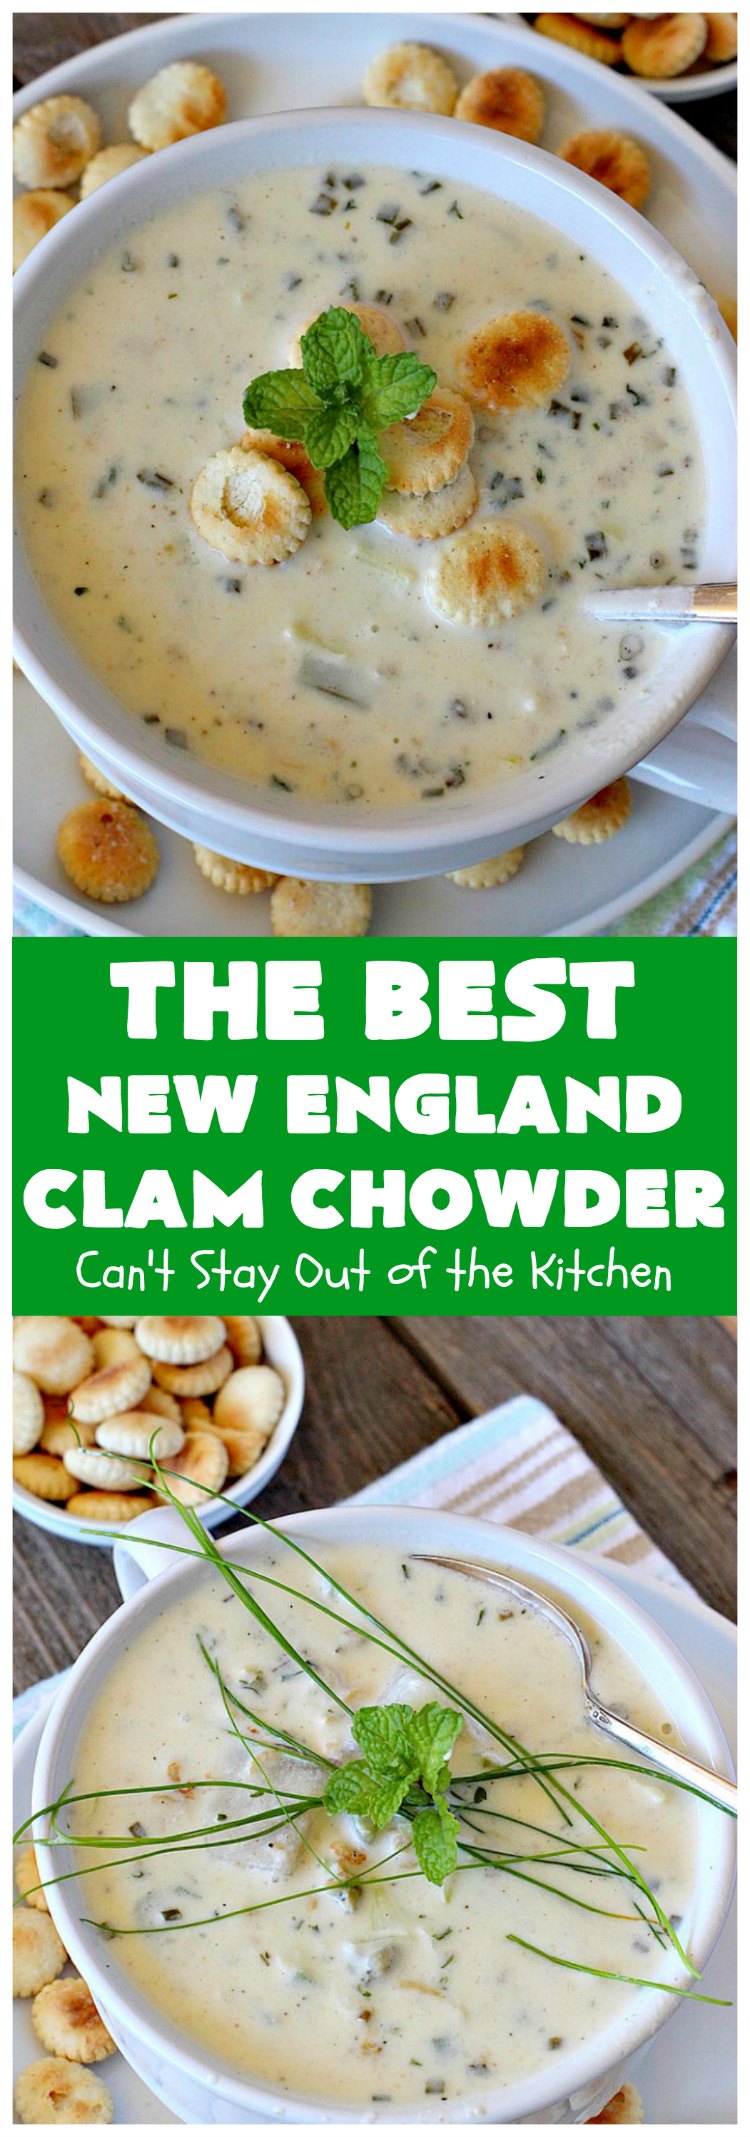 New England Clam Chowder | Can't Stay Out of the Kitchen